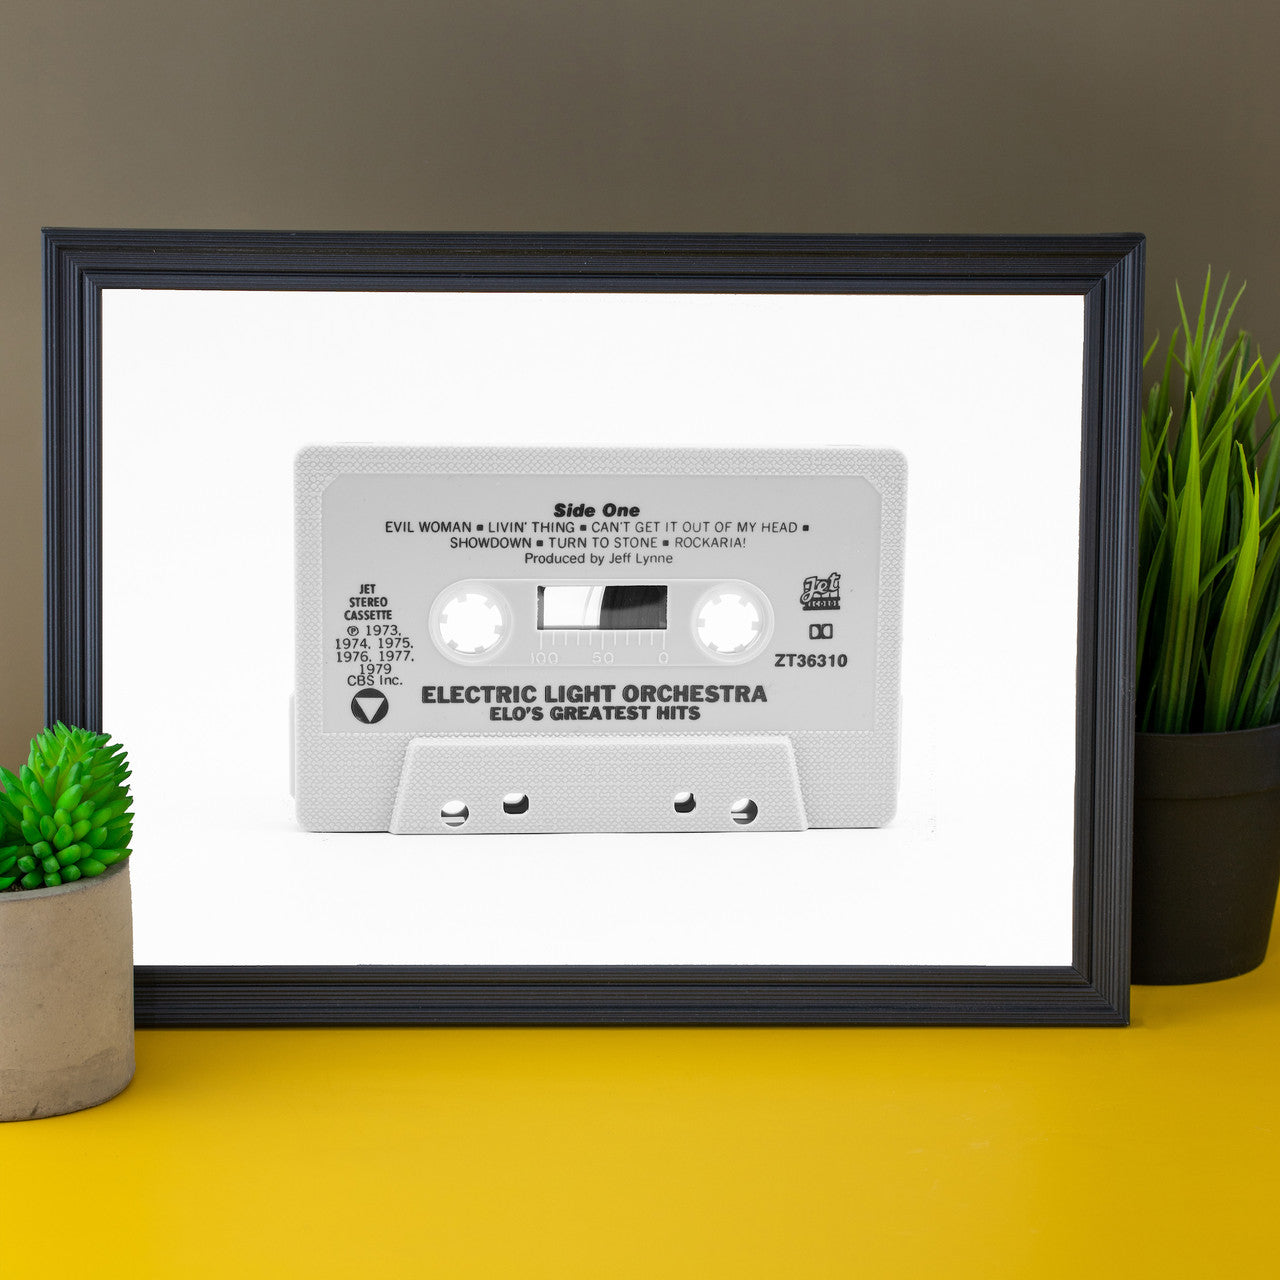 Modern art photo of the cassette of Electric Light Orchestra's "ELO's Greatest Hits" displayed in your office